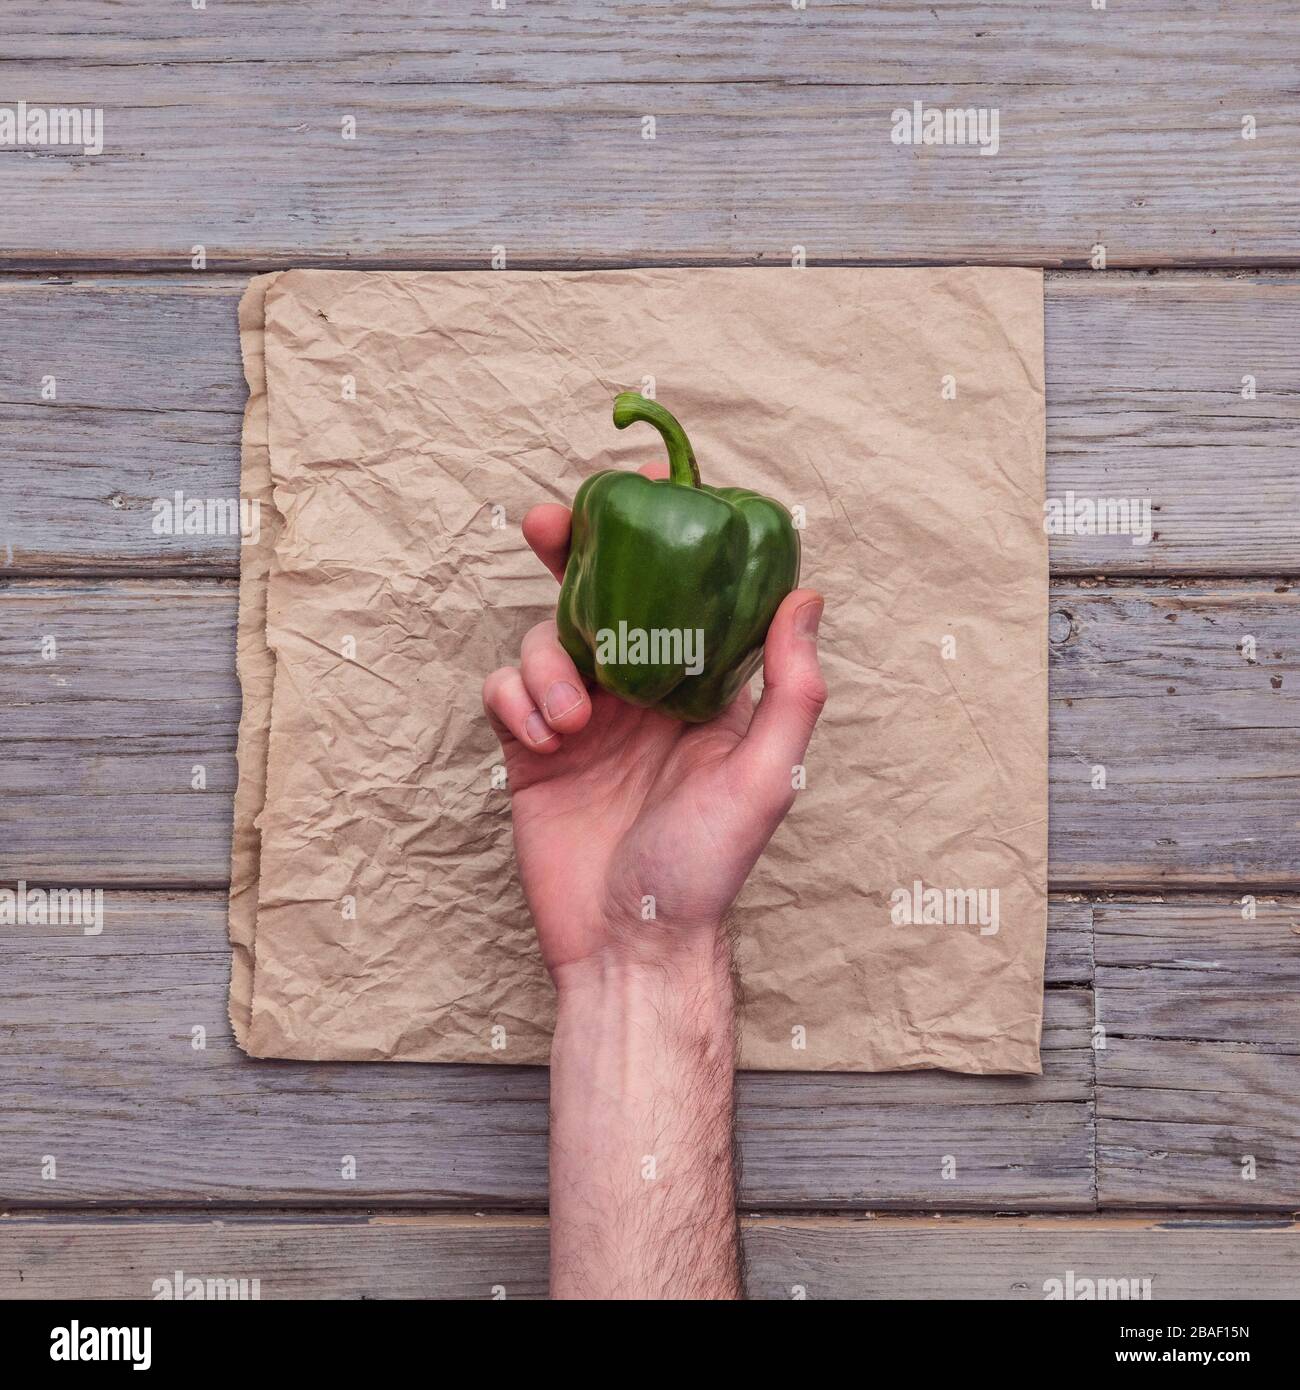 A male hand holding a fresh pepper against a rustic background Stock Photo